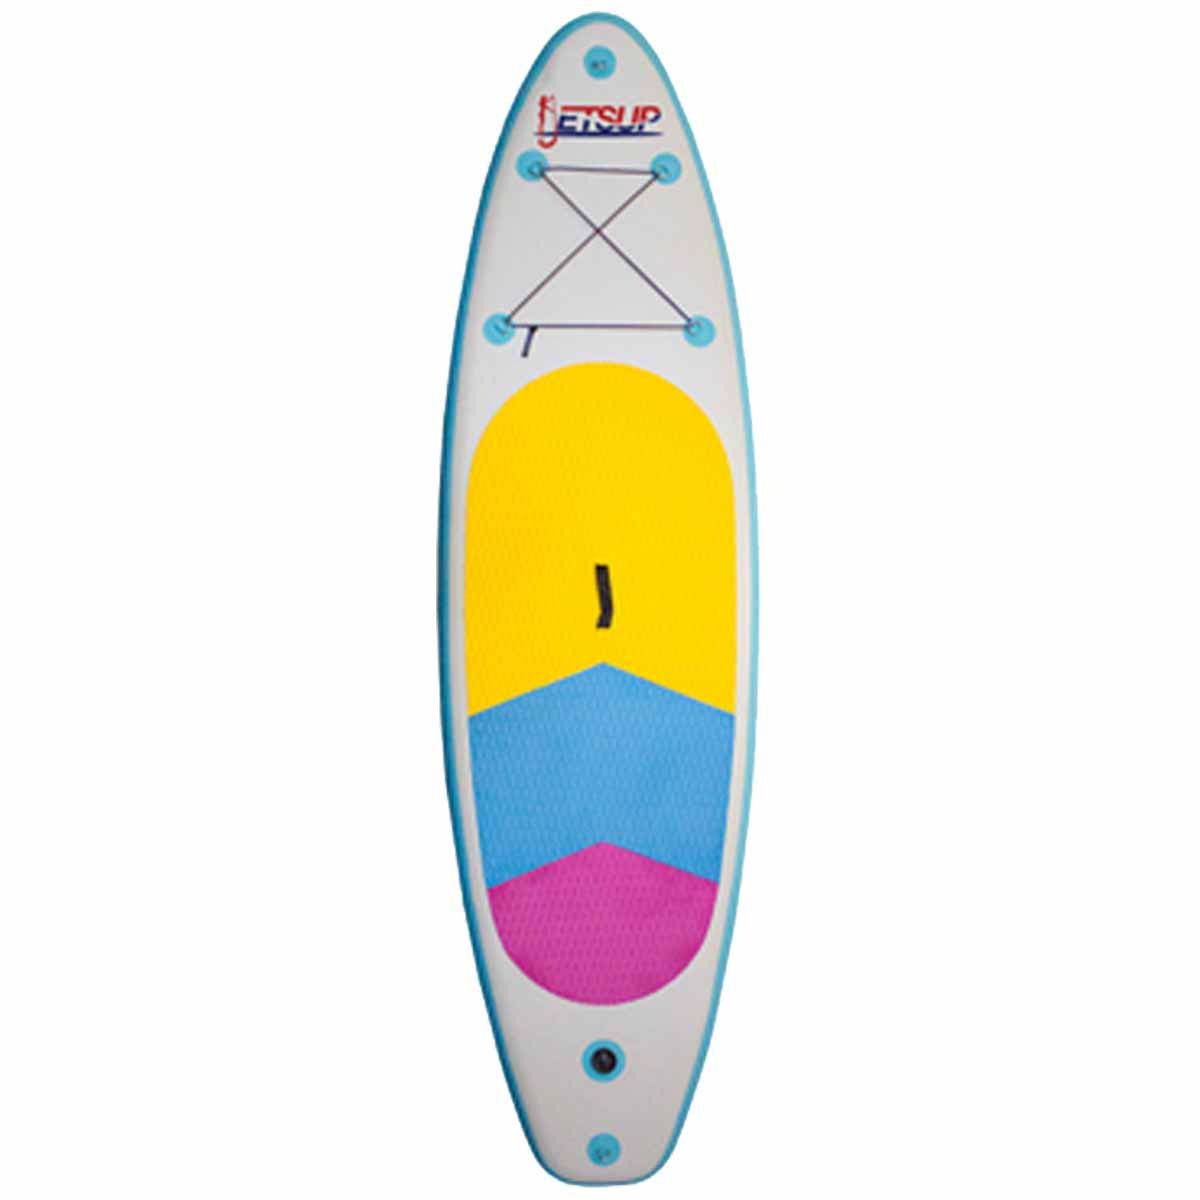 JETSUP-10 120inch Stand-Up Paddleboard _Top View